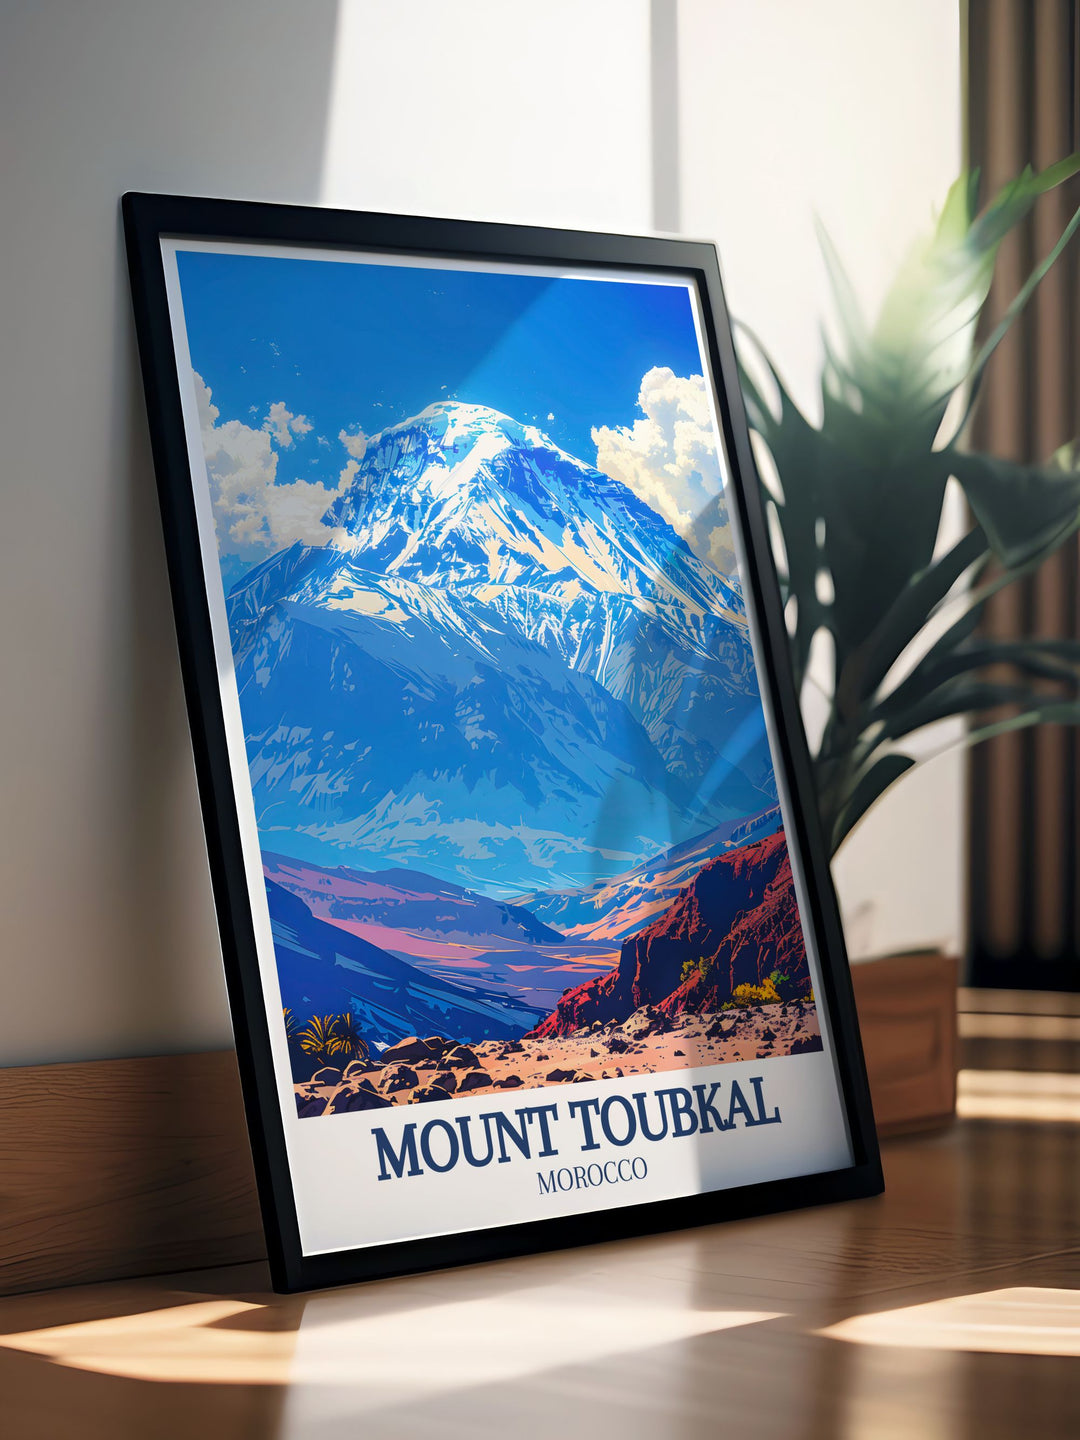 Decorate your living space with this beautiful High Atlas mountains poster featuring the iconic Mount Toubkal and surrounding valleys the perfect Moroccan gift and a timeless piece of art that celebrates the rich culture and natural beauty of the Atlas Mountains.